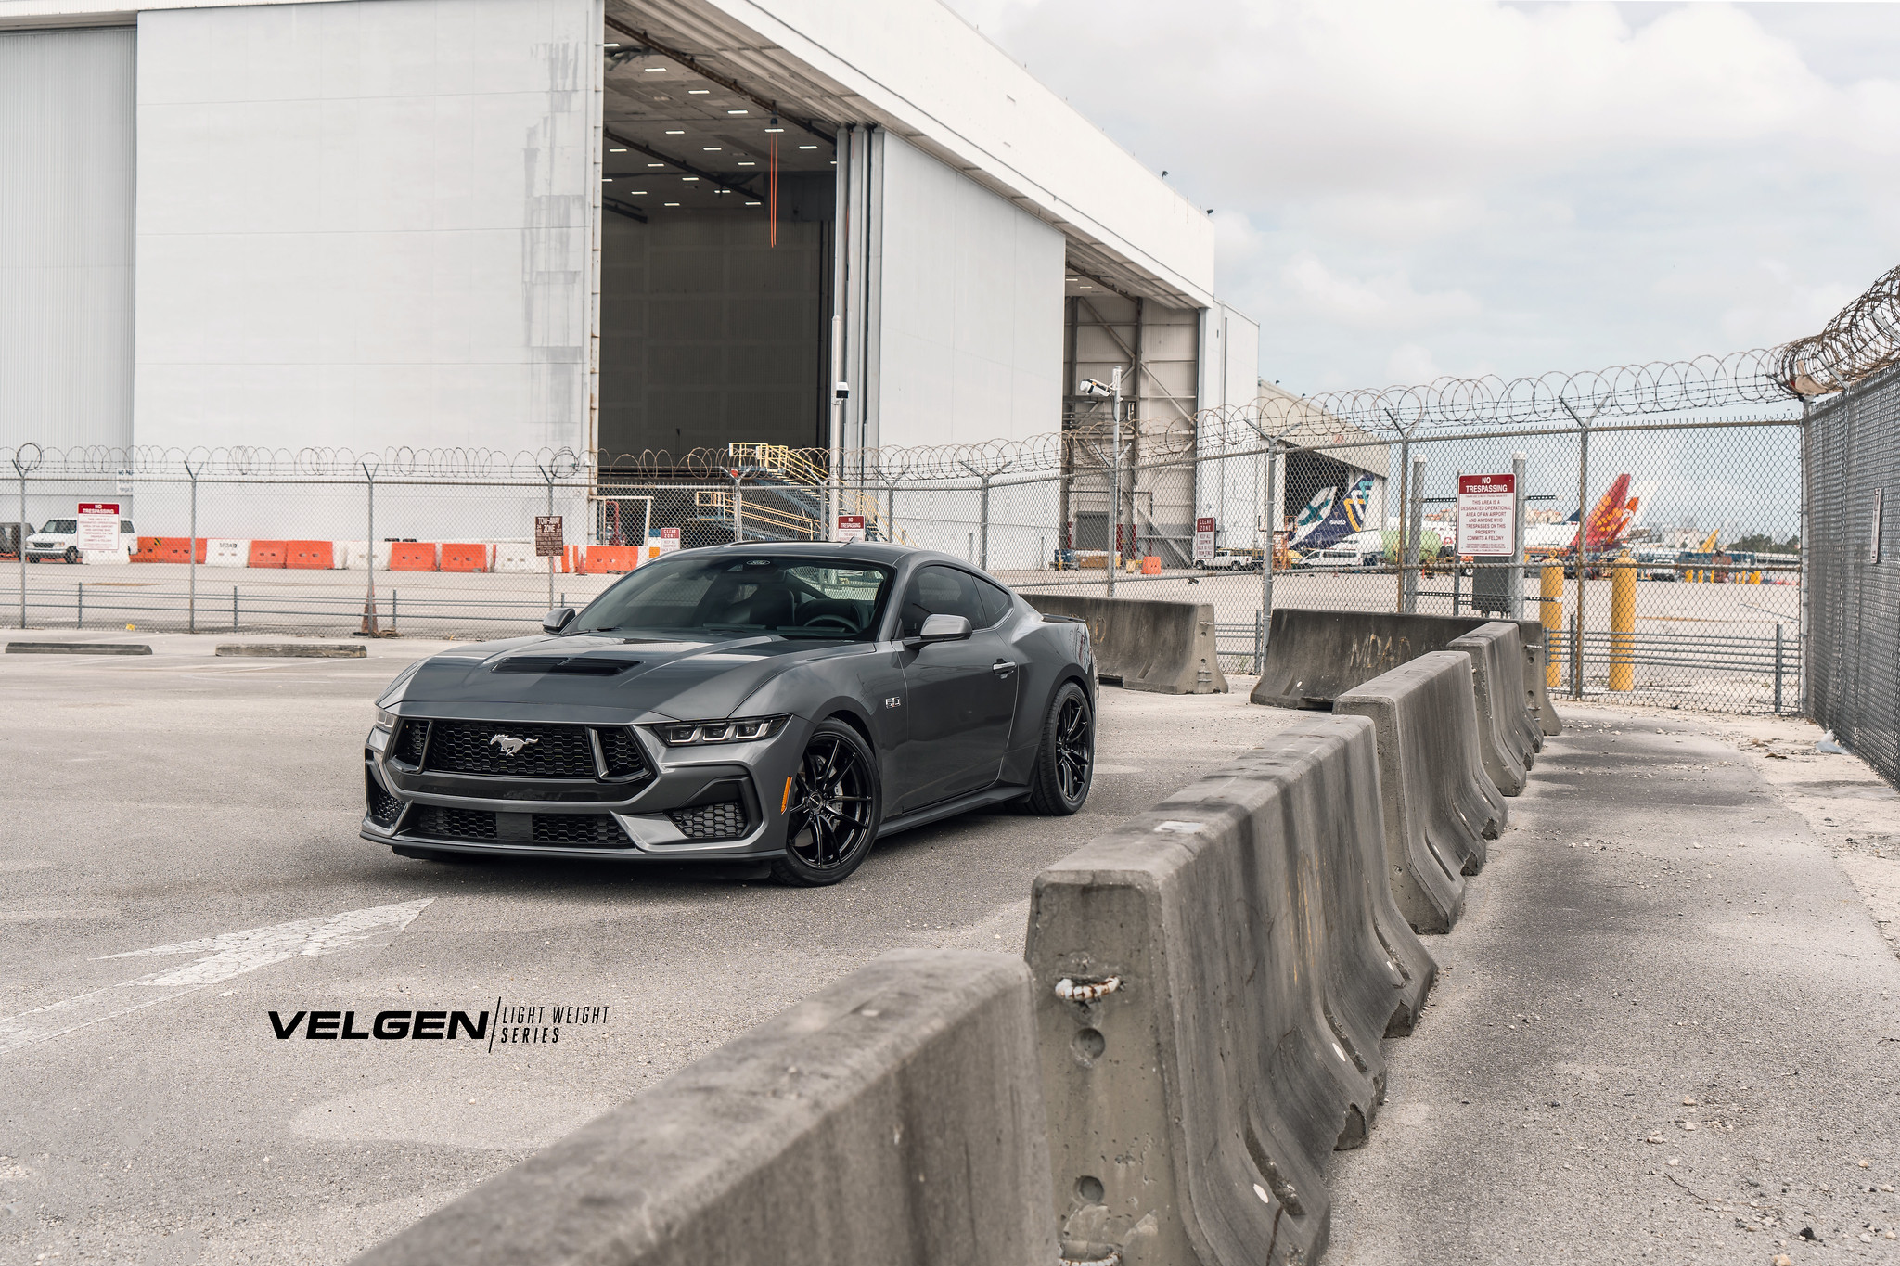 S650 Mustang 19" 20" Velgen Flow Forged Concave Wheels Mustang S650 - Vibe Motorsports Official Thread 53544125229_b508a69796_k